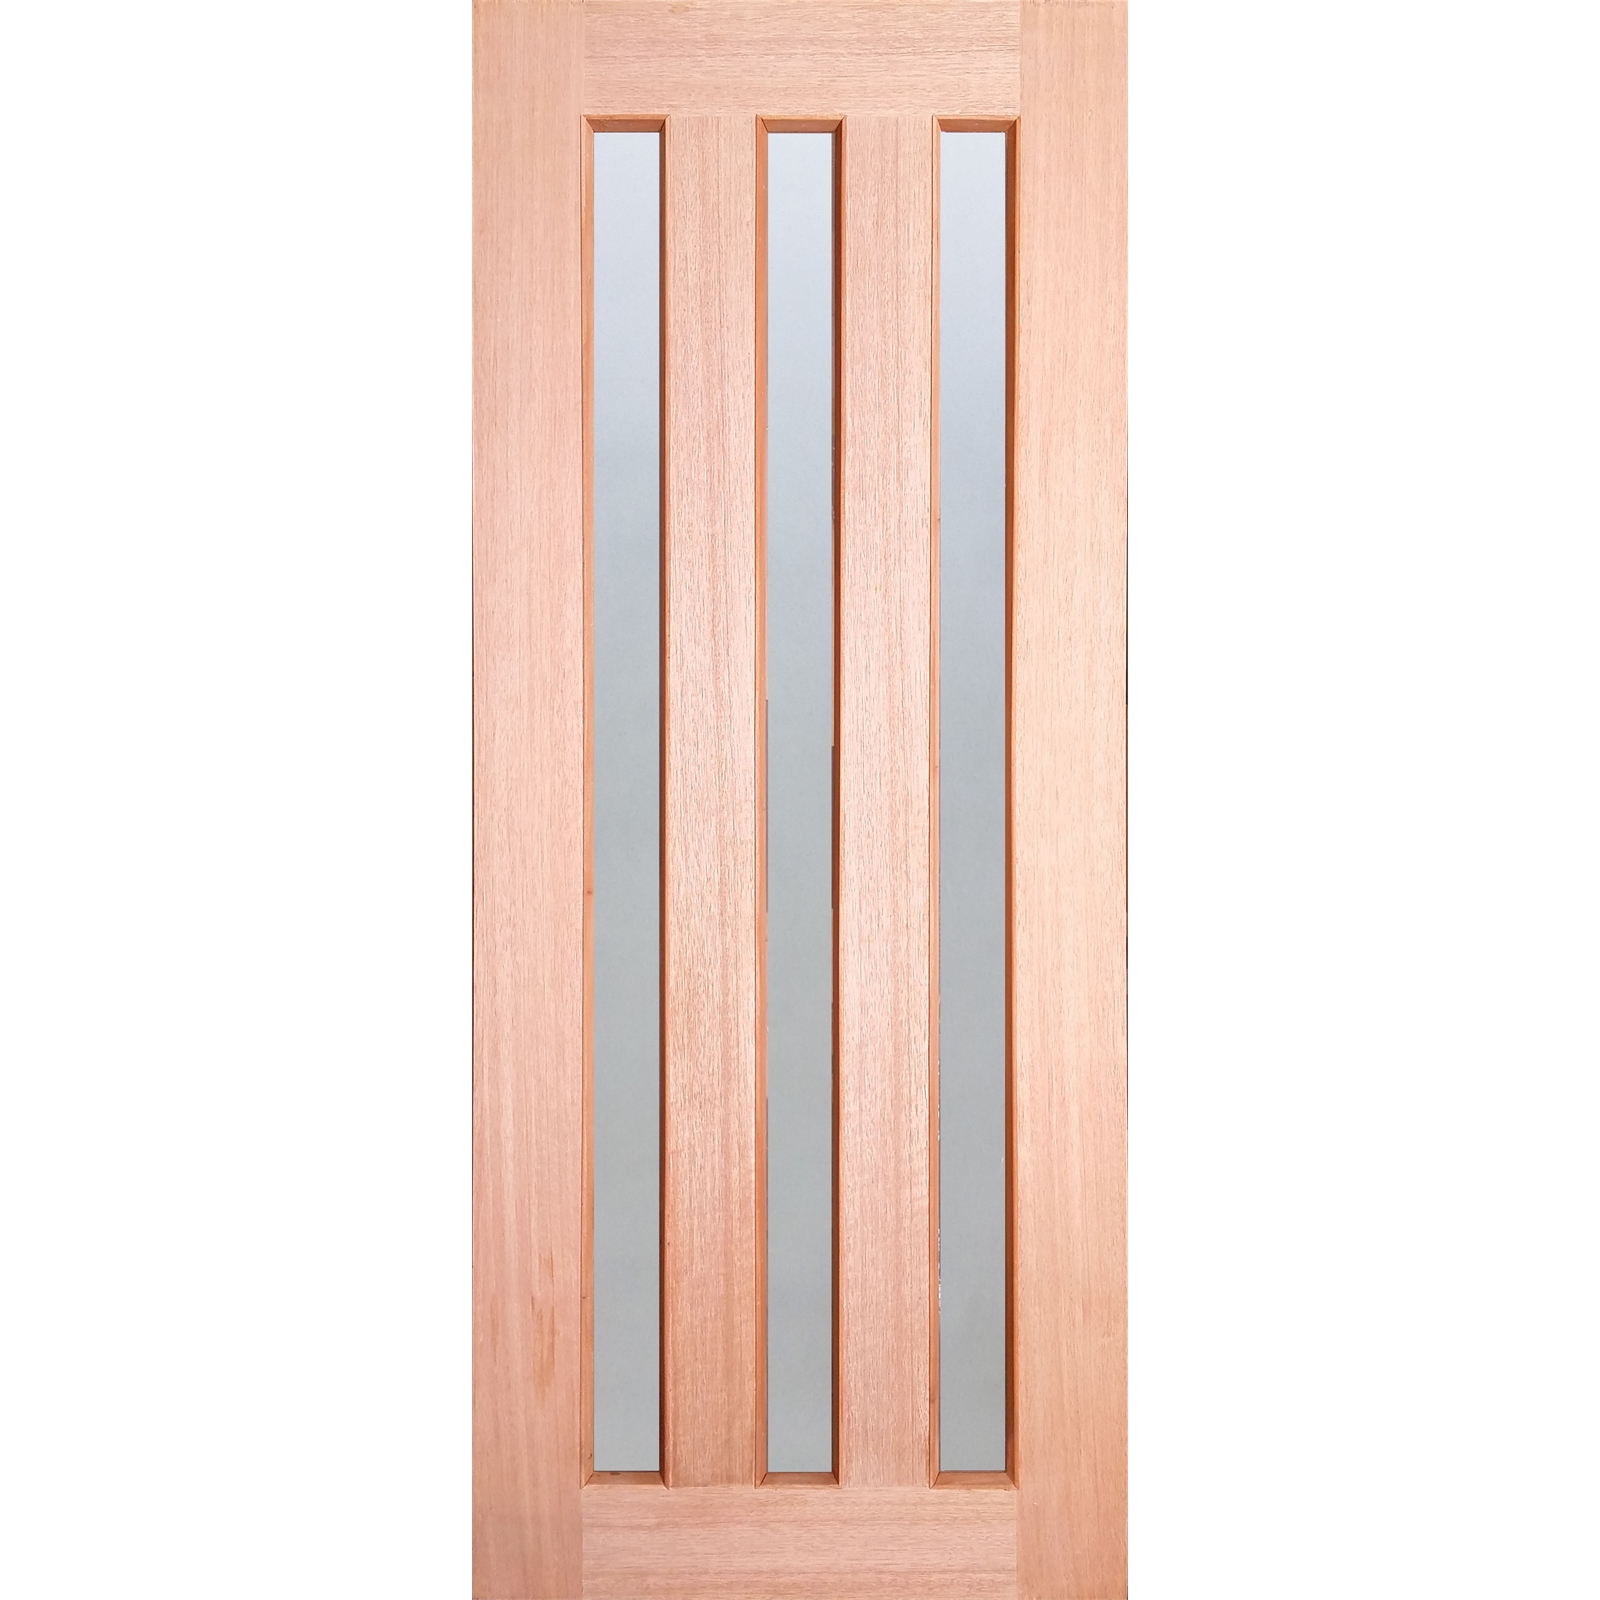 Woodcraft Doors 2040 x 820 x 40mm Entrance Door With Frosted Safety Glass